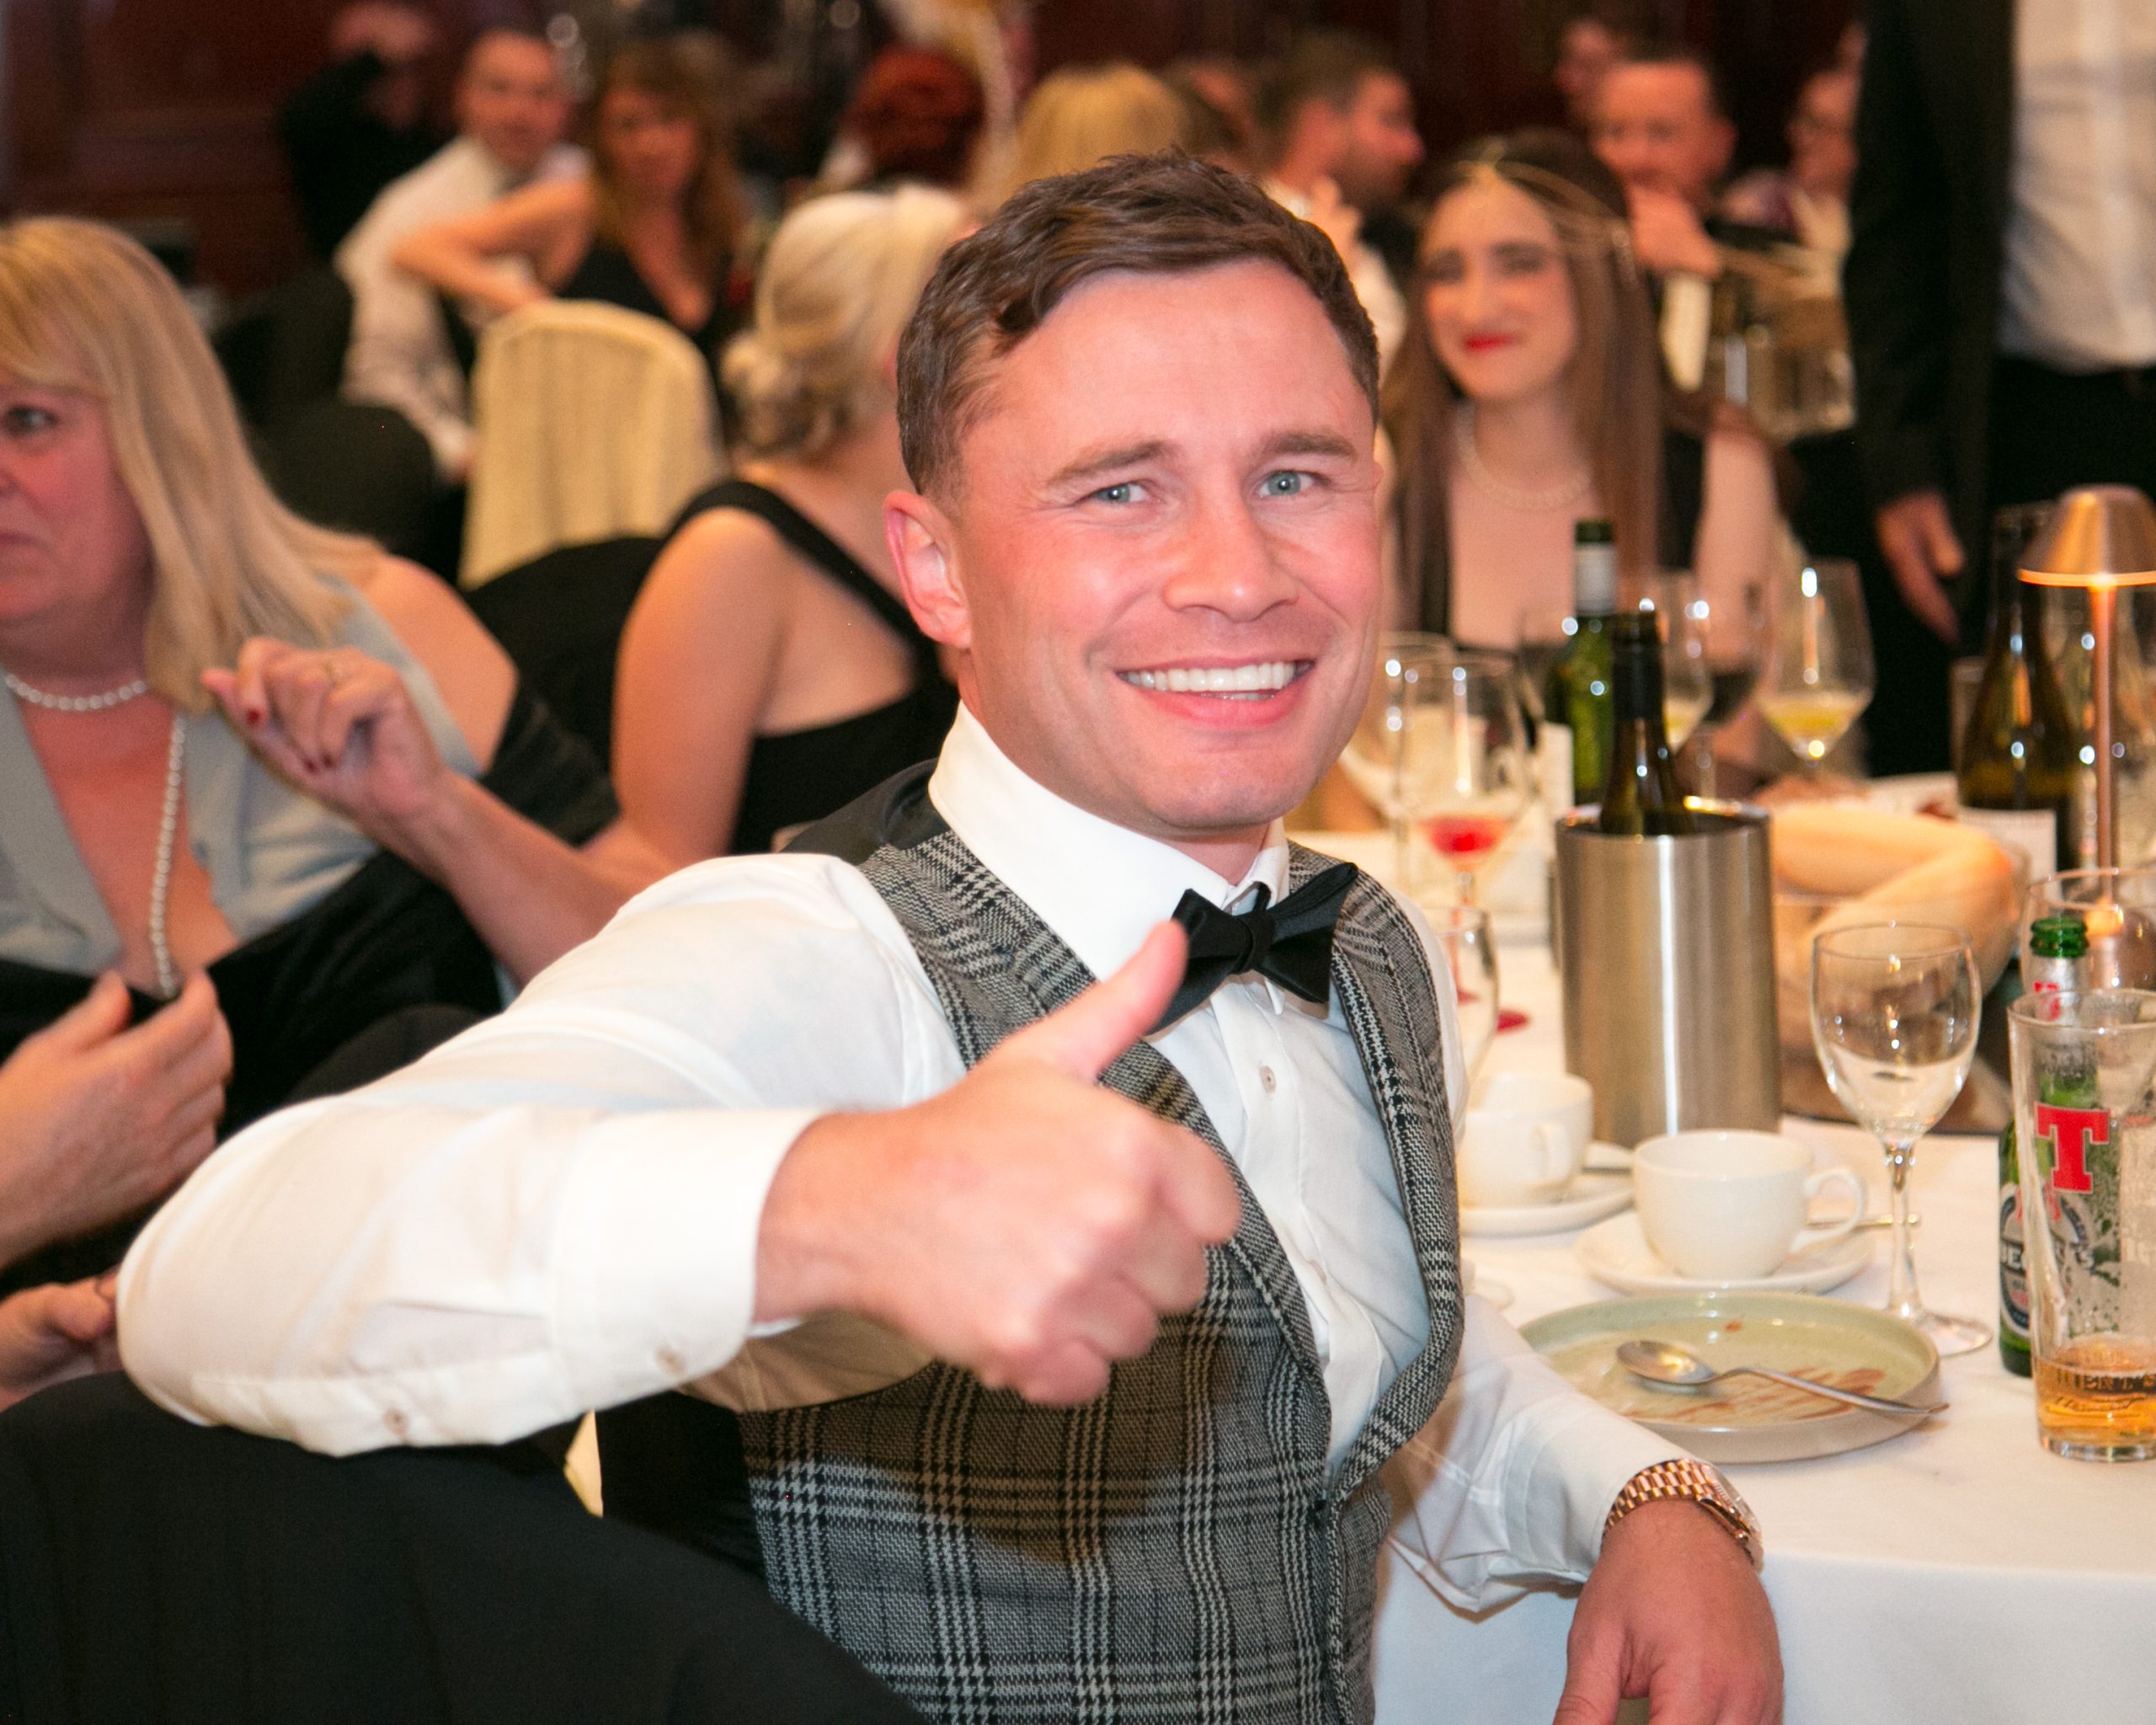 Click here to see who partied like Gatsby at the LCN Awards